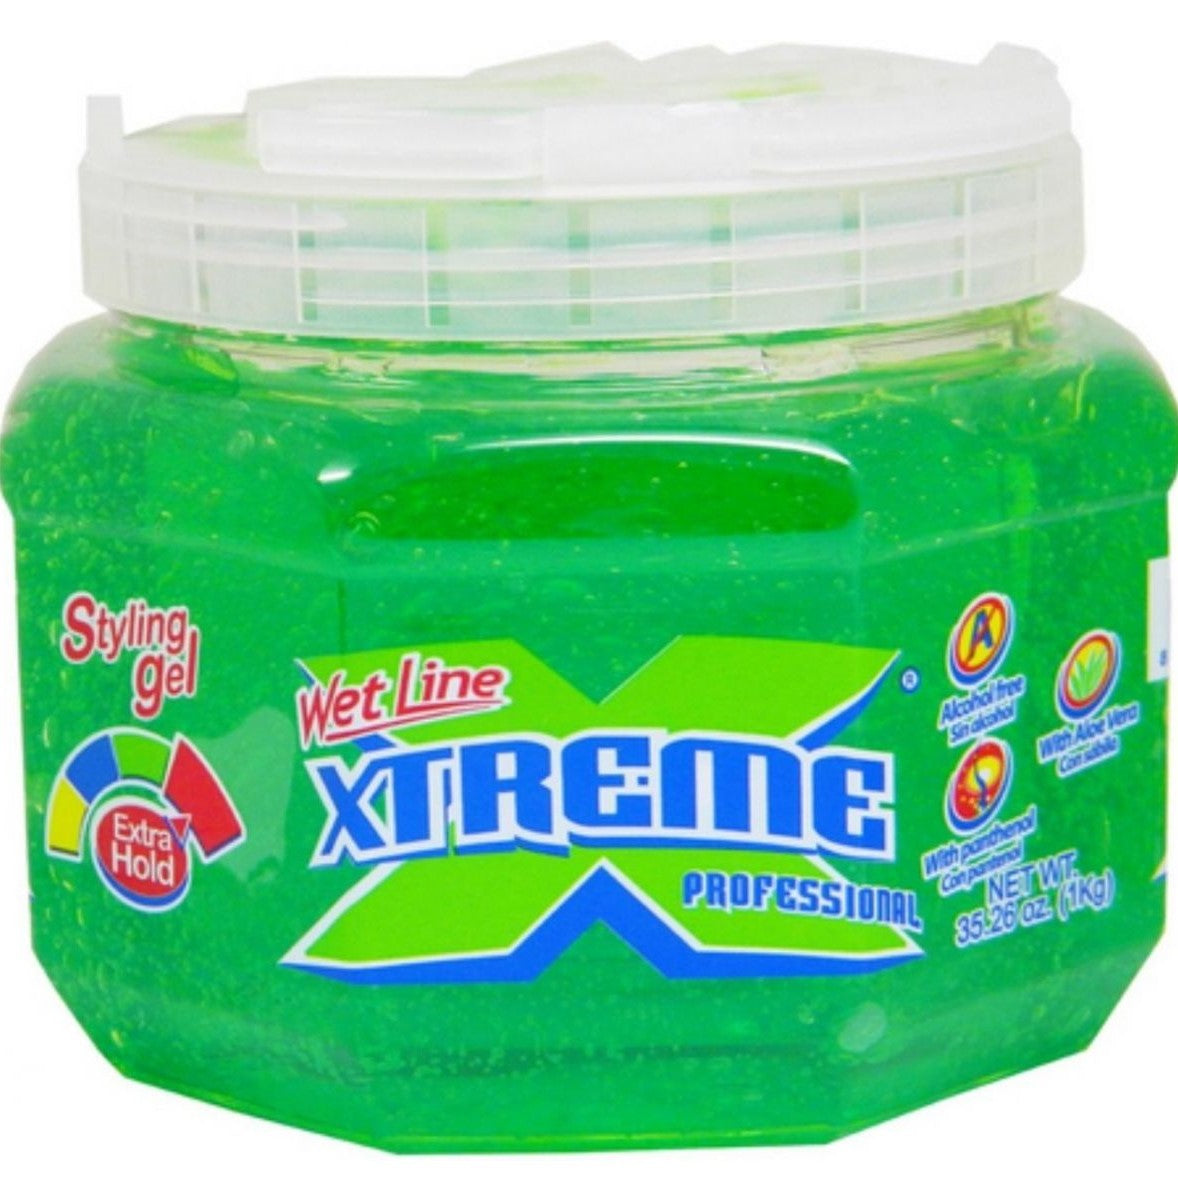 Wet Line Xtreme Professional Styling Gel Extra Hold Green, 35.6 Oz / 1 Kg